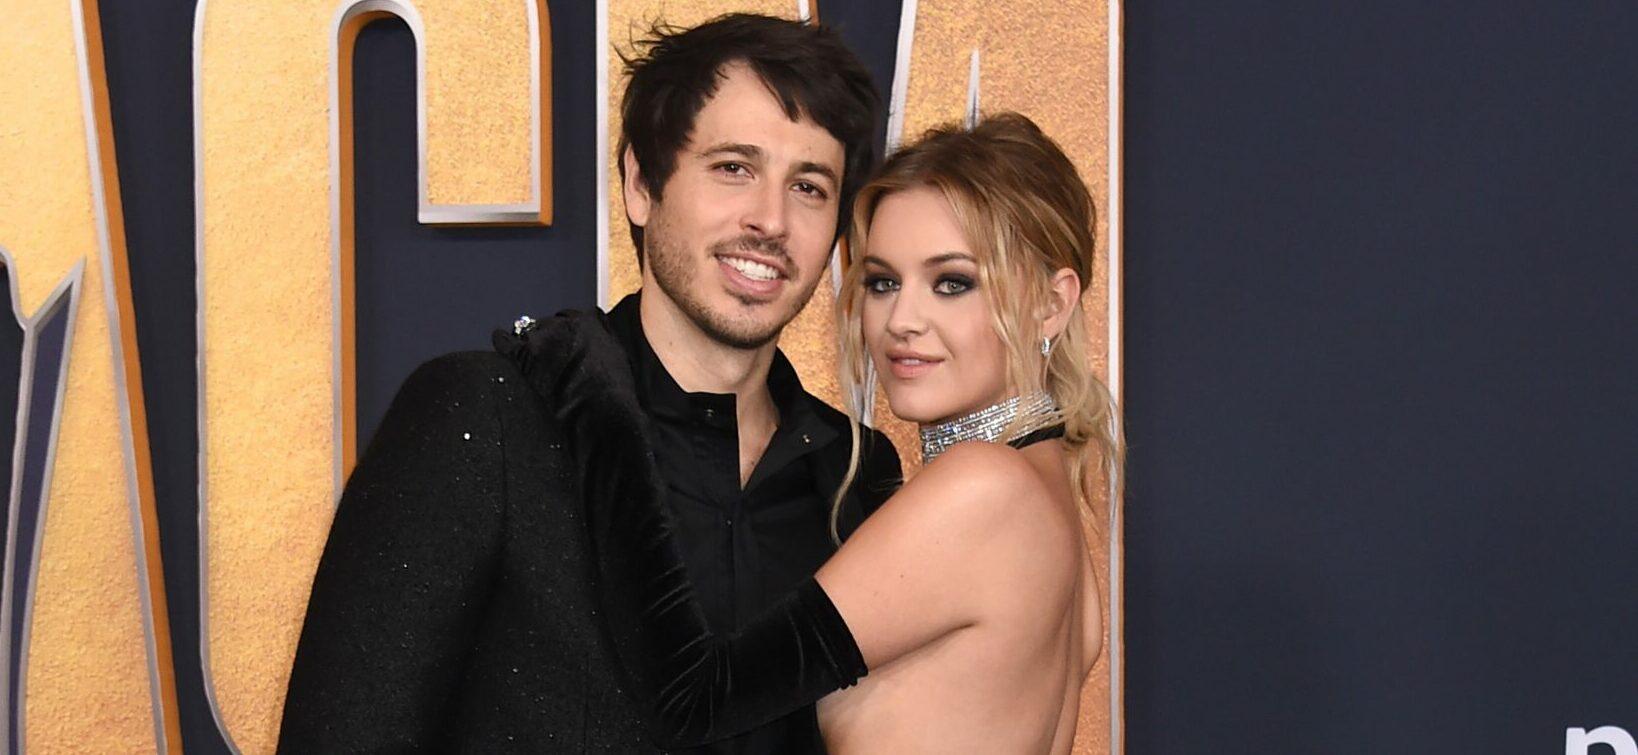 Morgan Evans Speaks On His Healing Process Amid Split From Kelsea Ballerini And Her Chase Stokes Romance